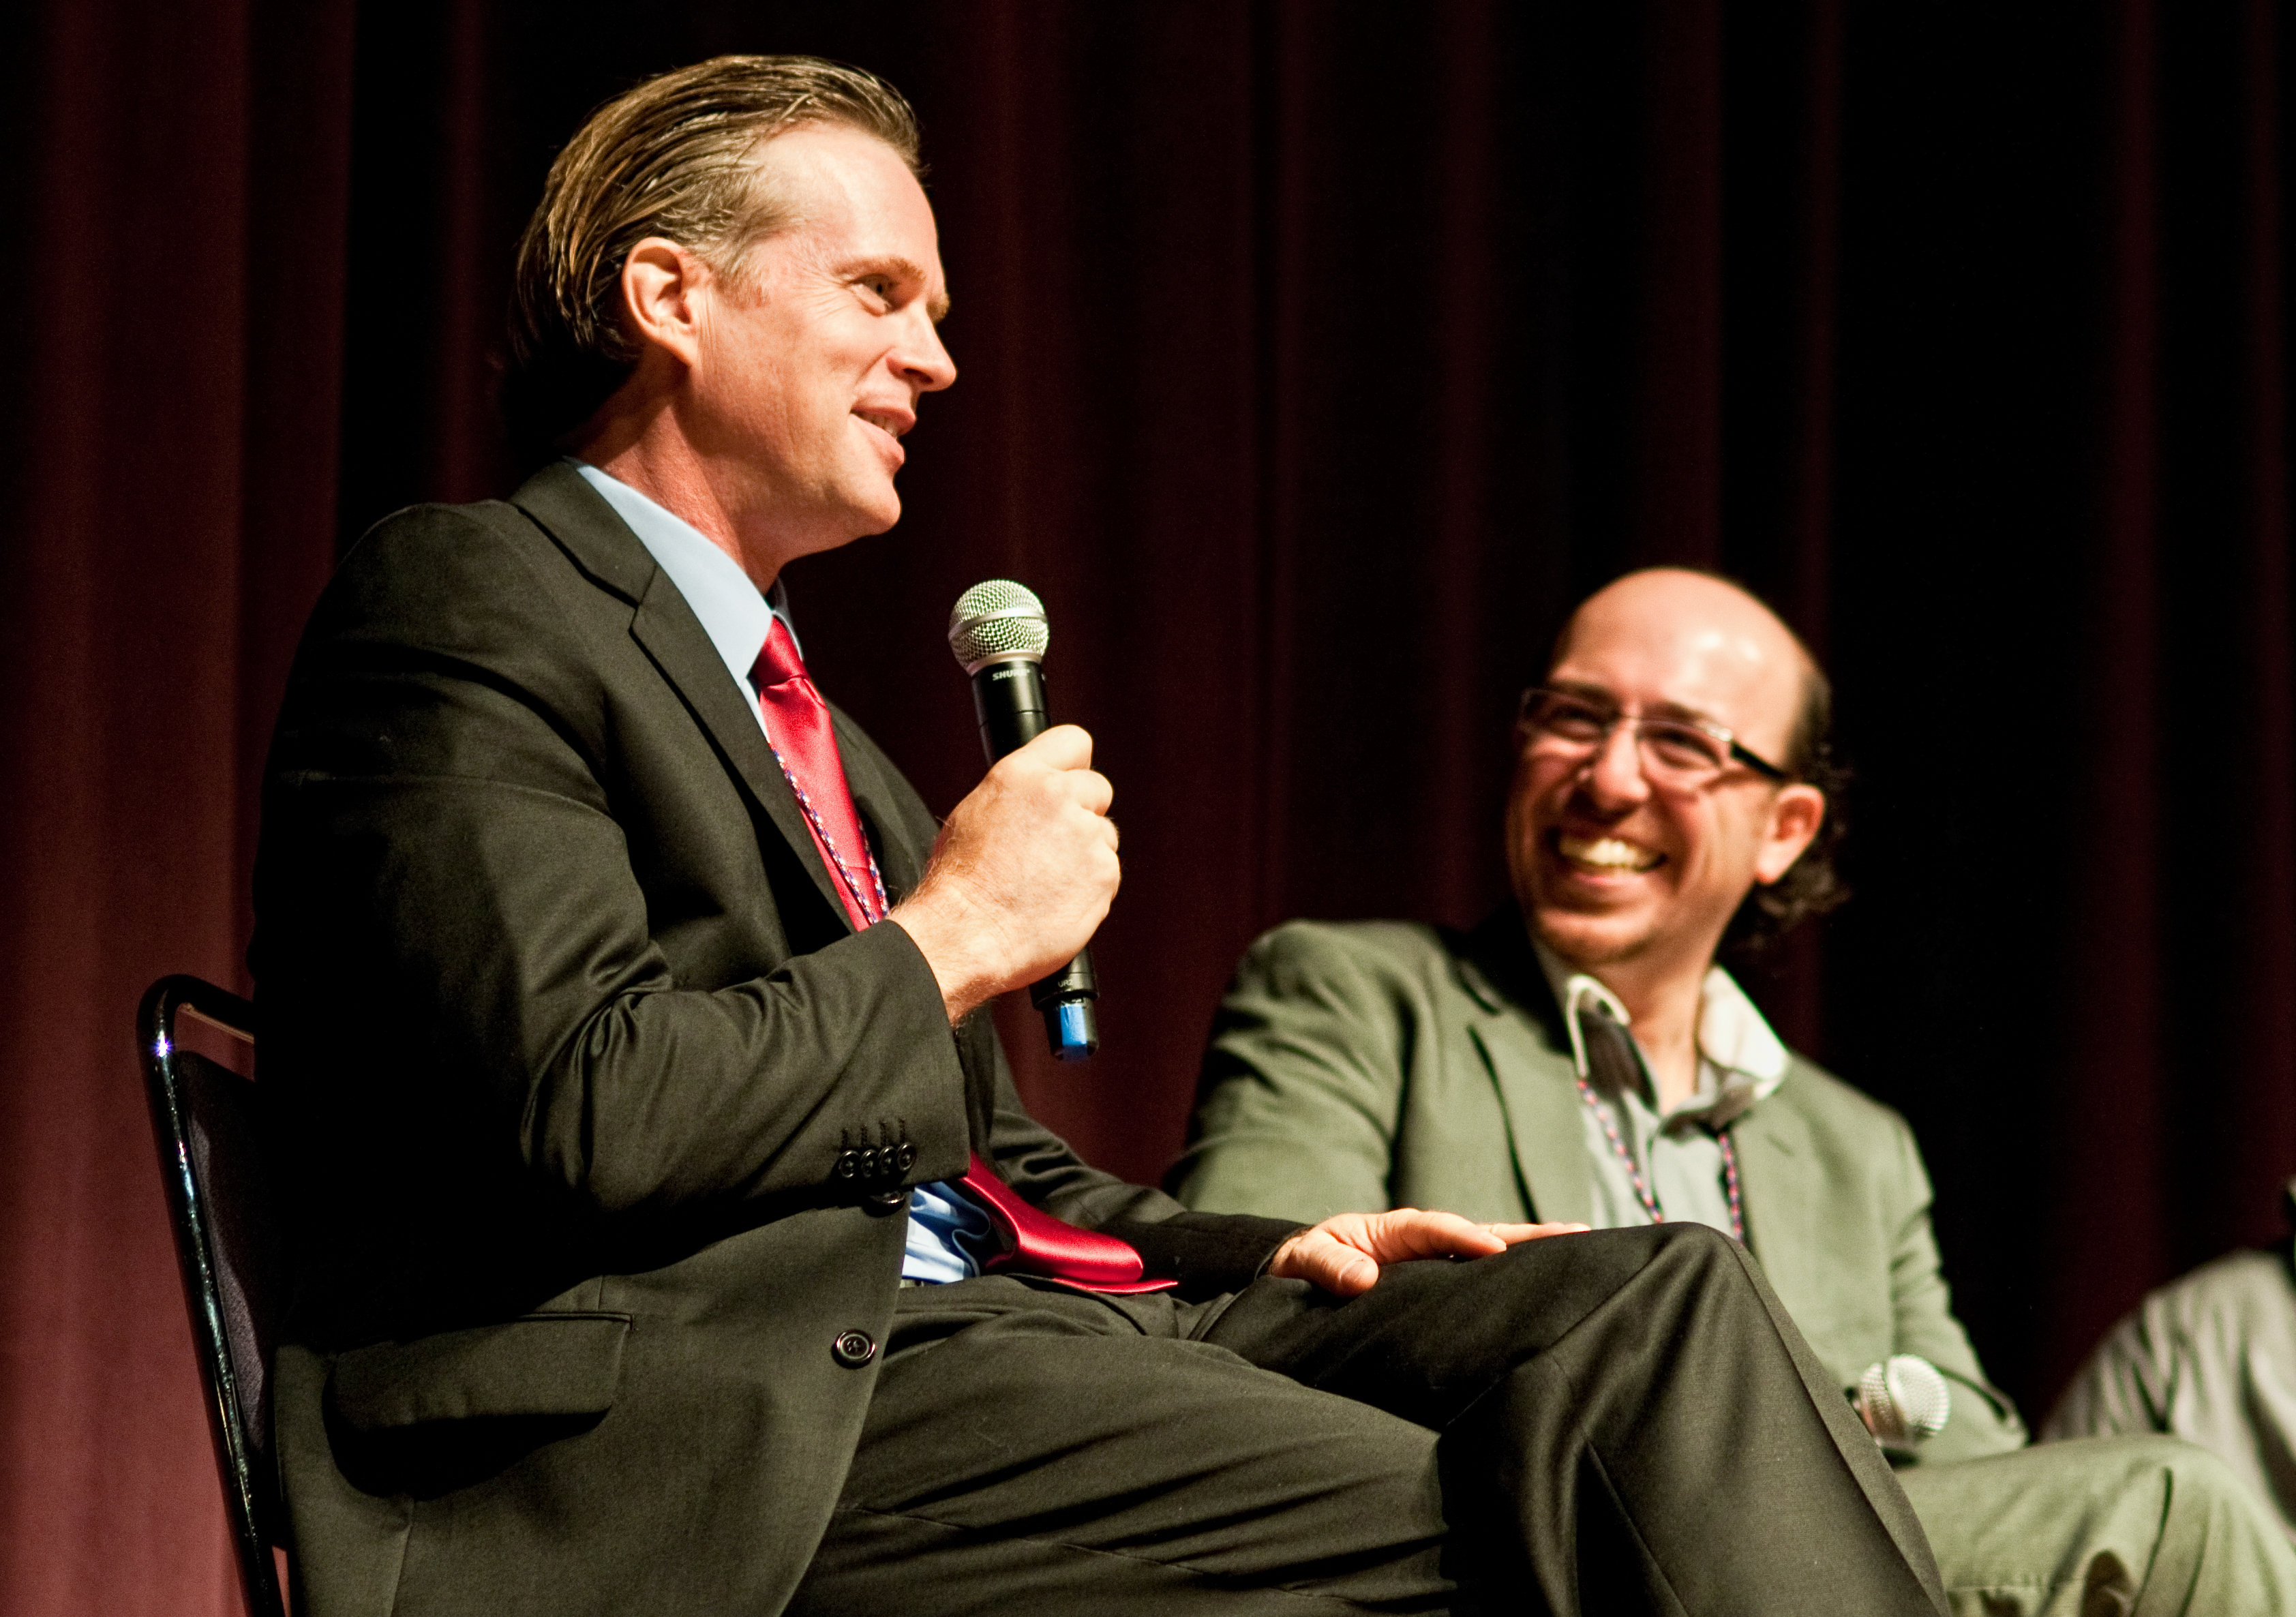 Cary Elwes and Director Sam Kadi after THE CITIZEN screening.